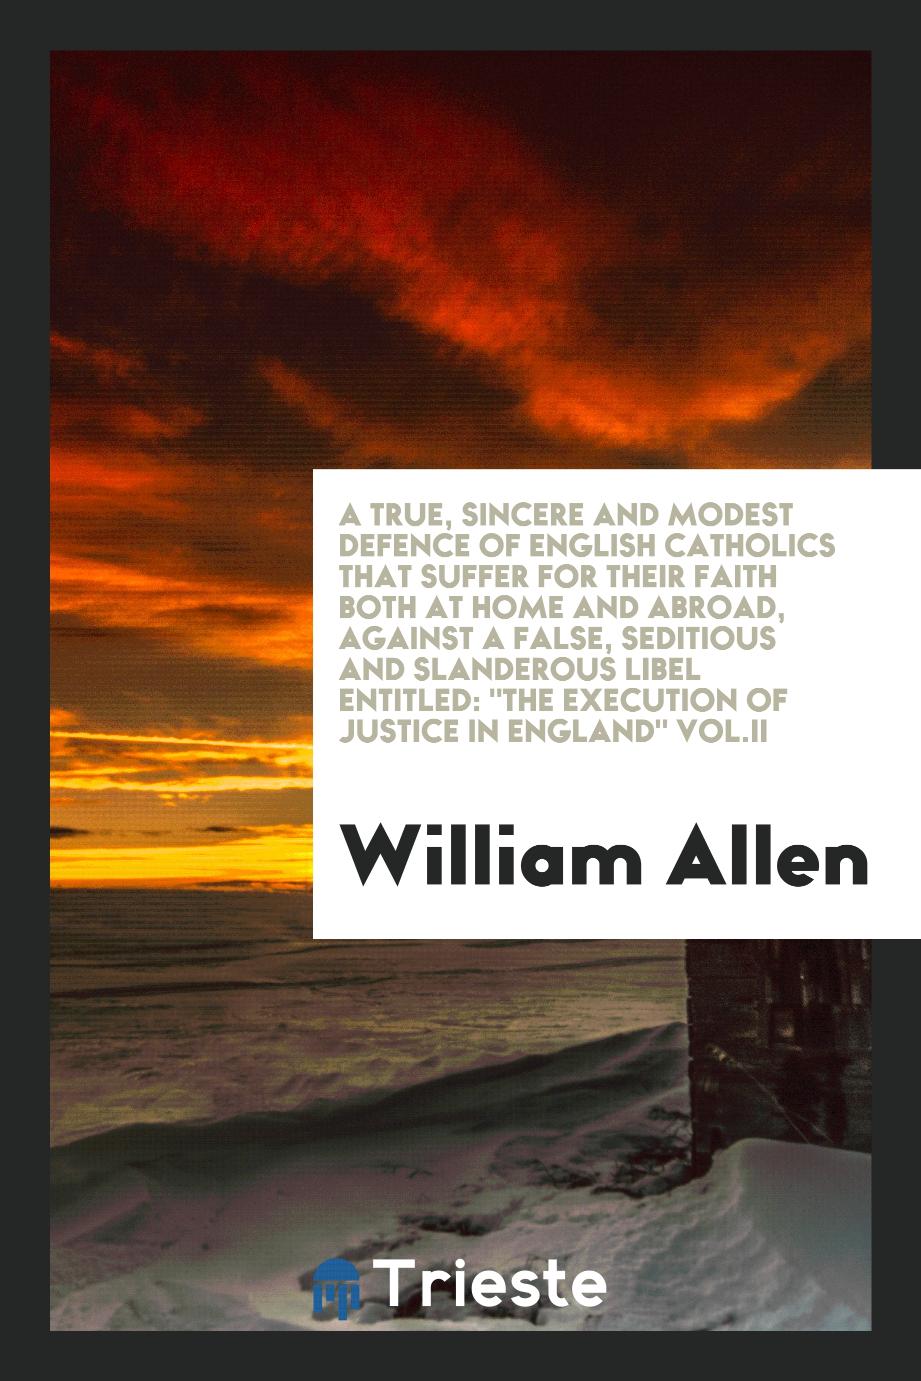 A true, sincere and modest defence of English Catholics that suffer for their faith both at home and abroad, against a false, seditious and slanderous libel entitled: "The execution of justice in England" Vol.II